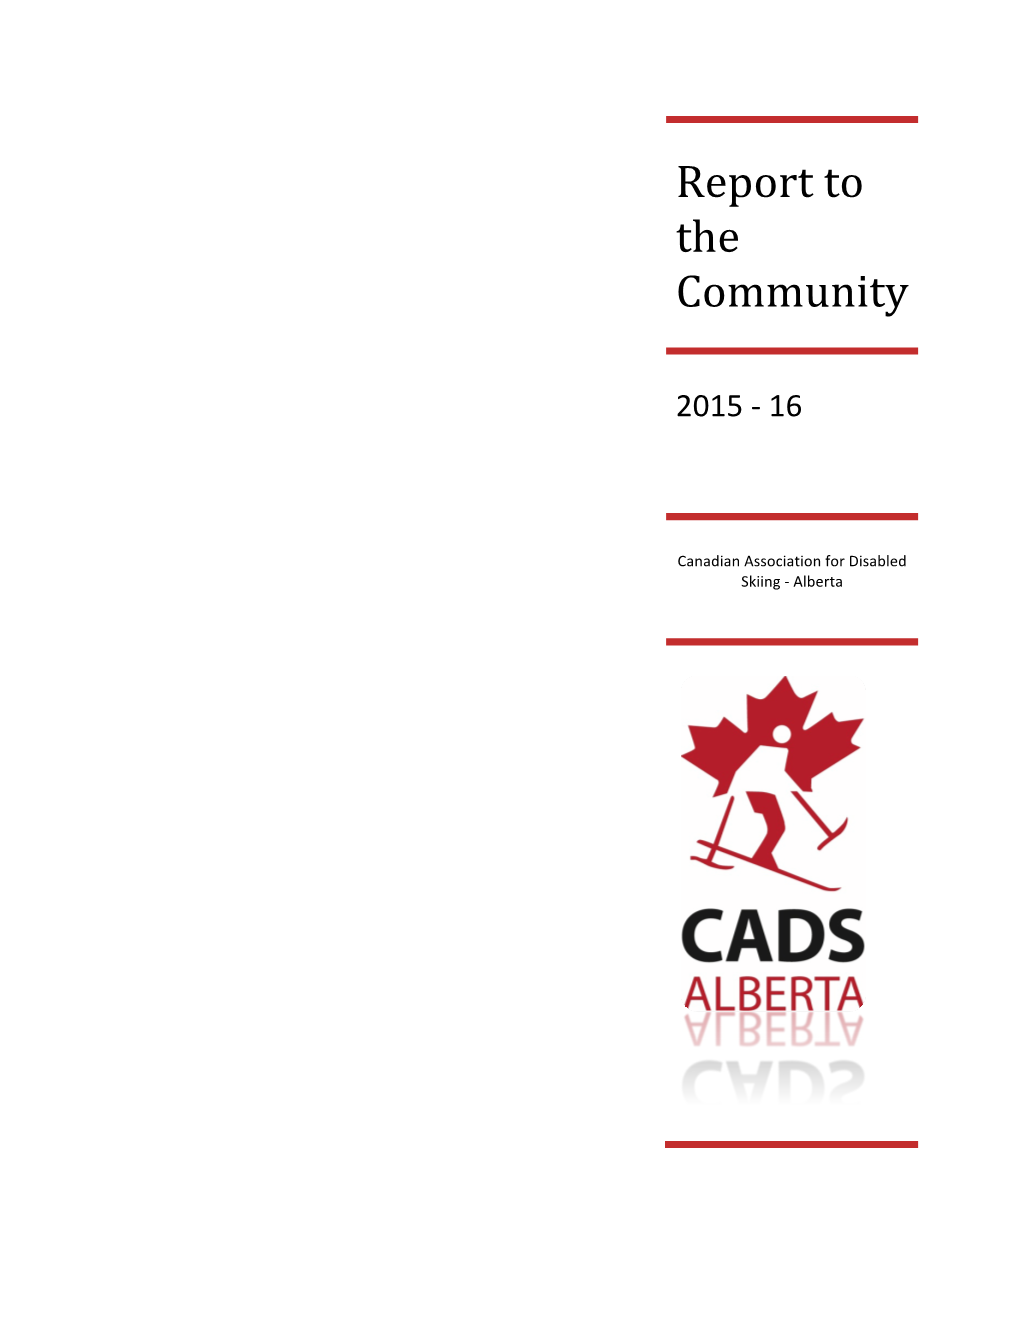 Report to the Community 2015-16 Final V3